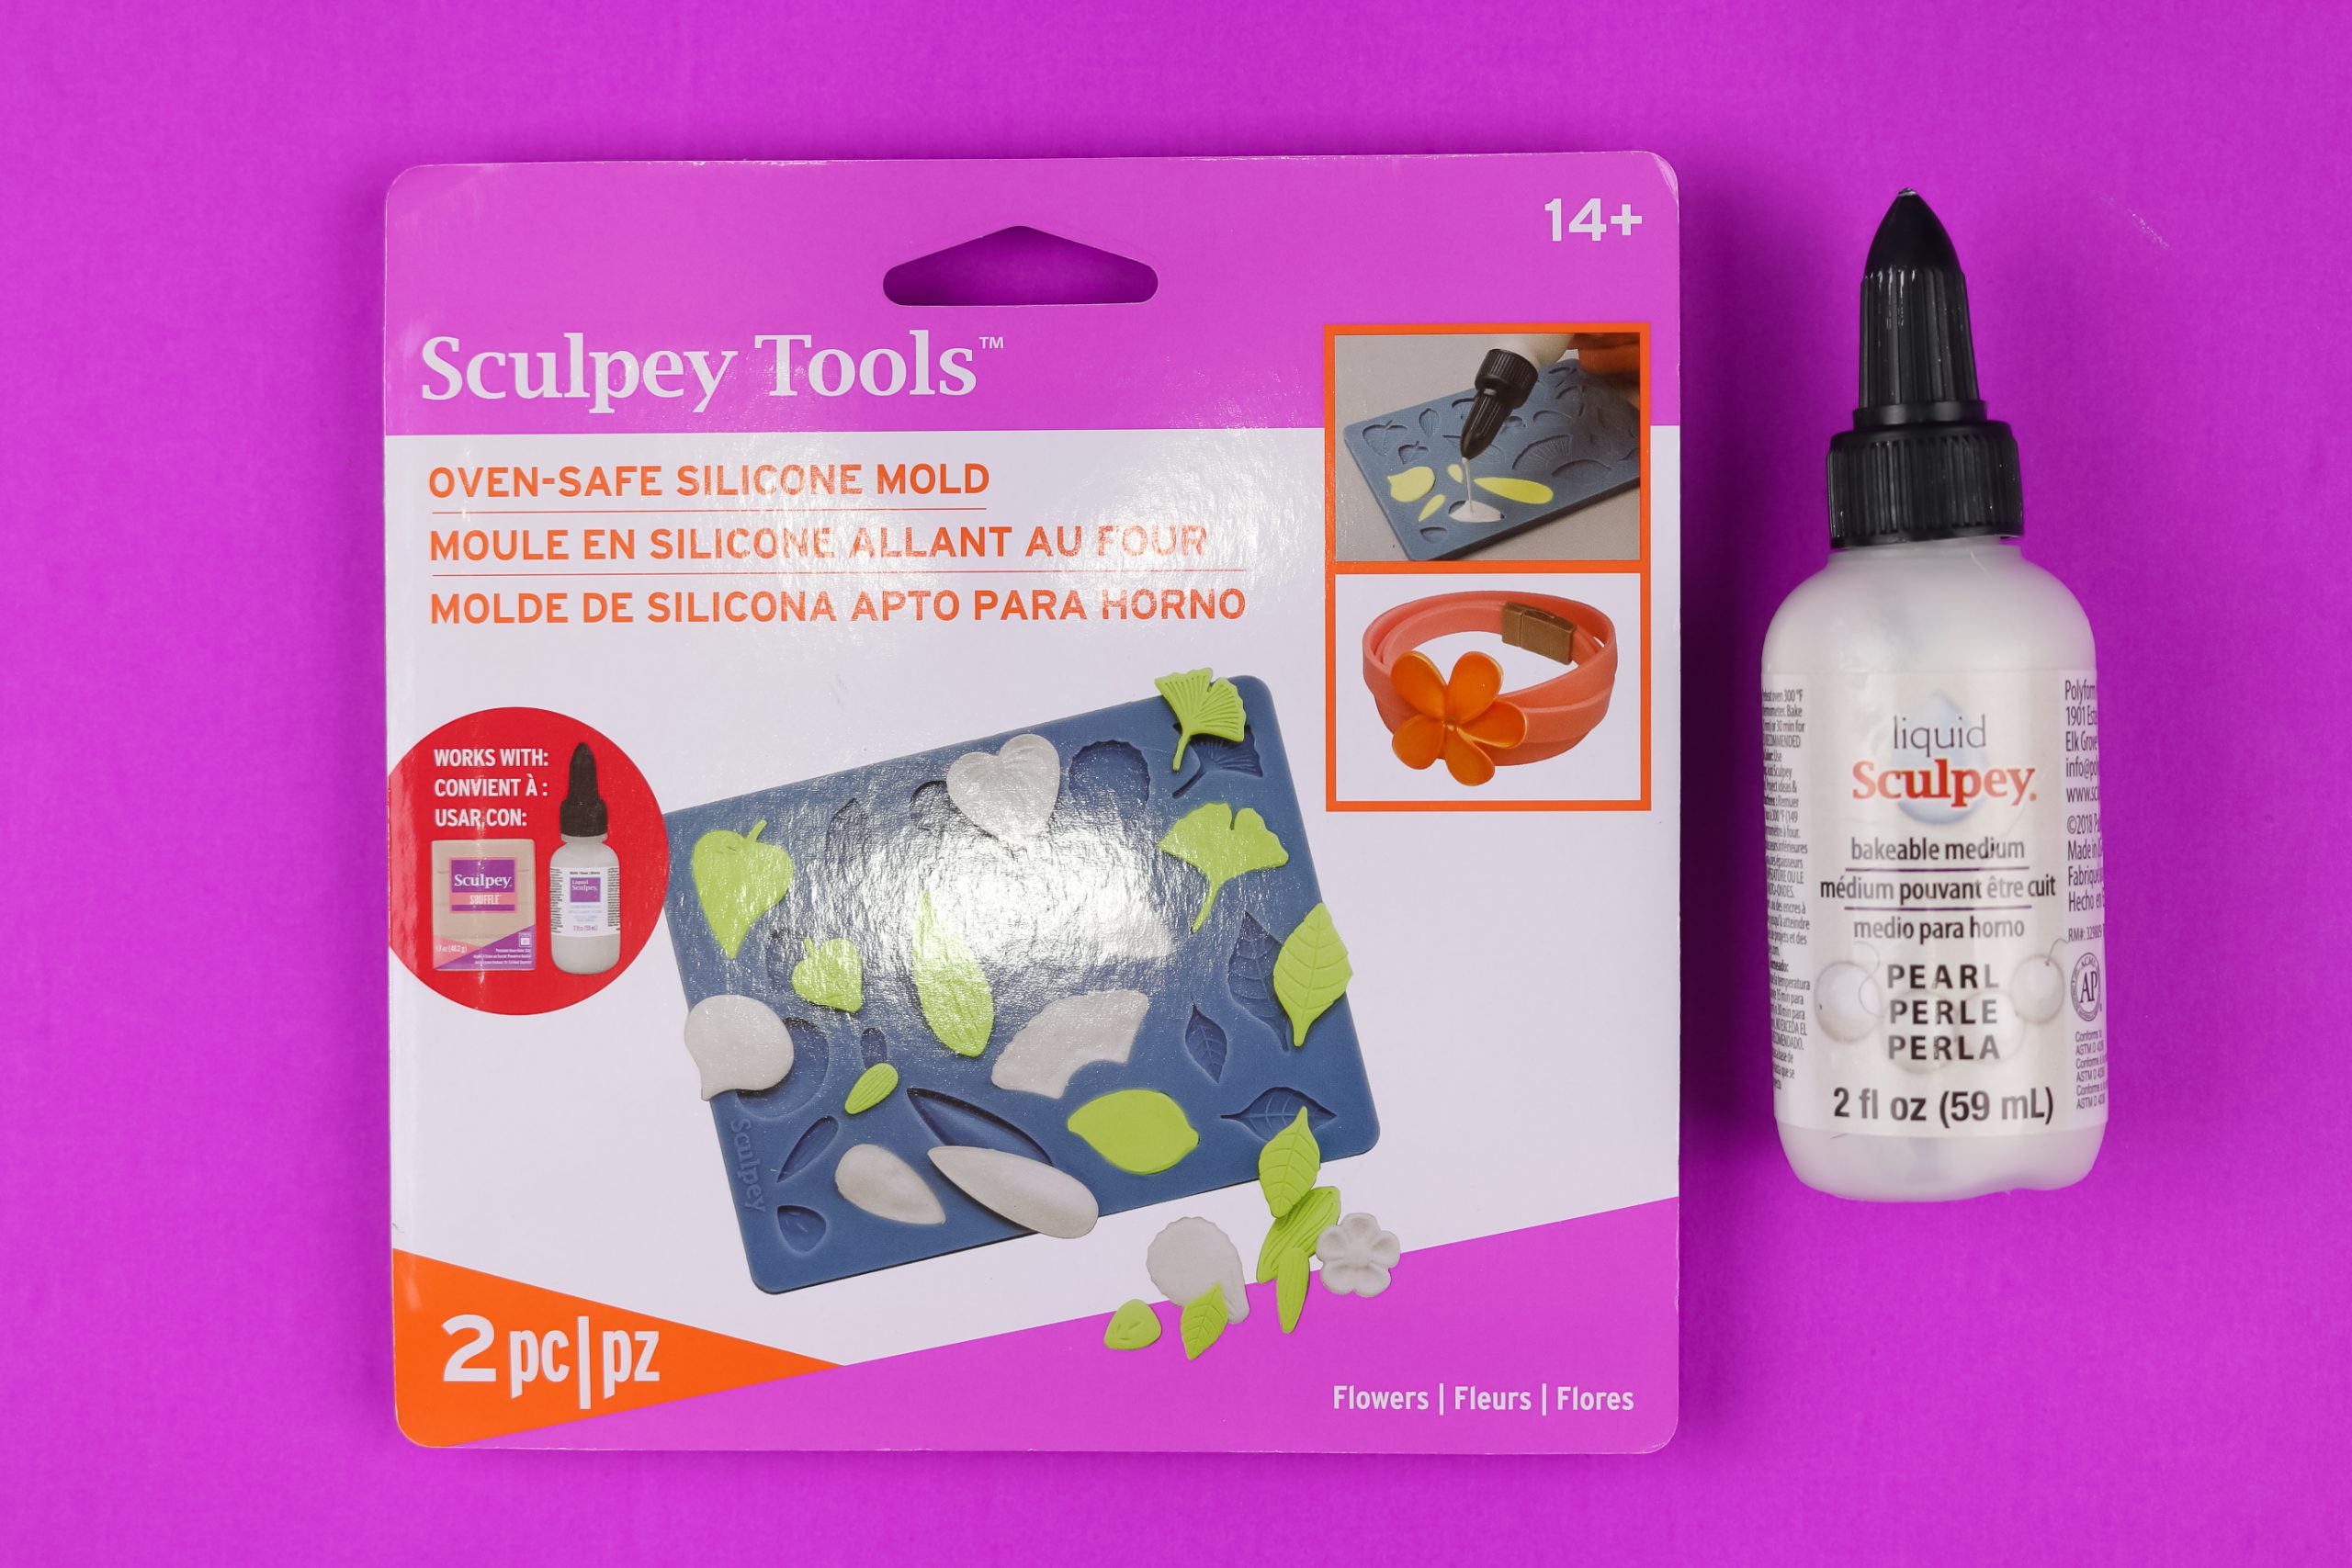 Sculpey flowers mold in its packaging next to a bottle of Pearl Liquid Sculpey